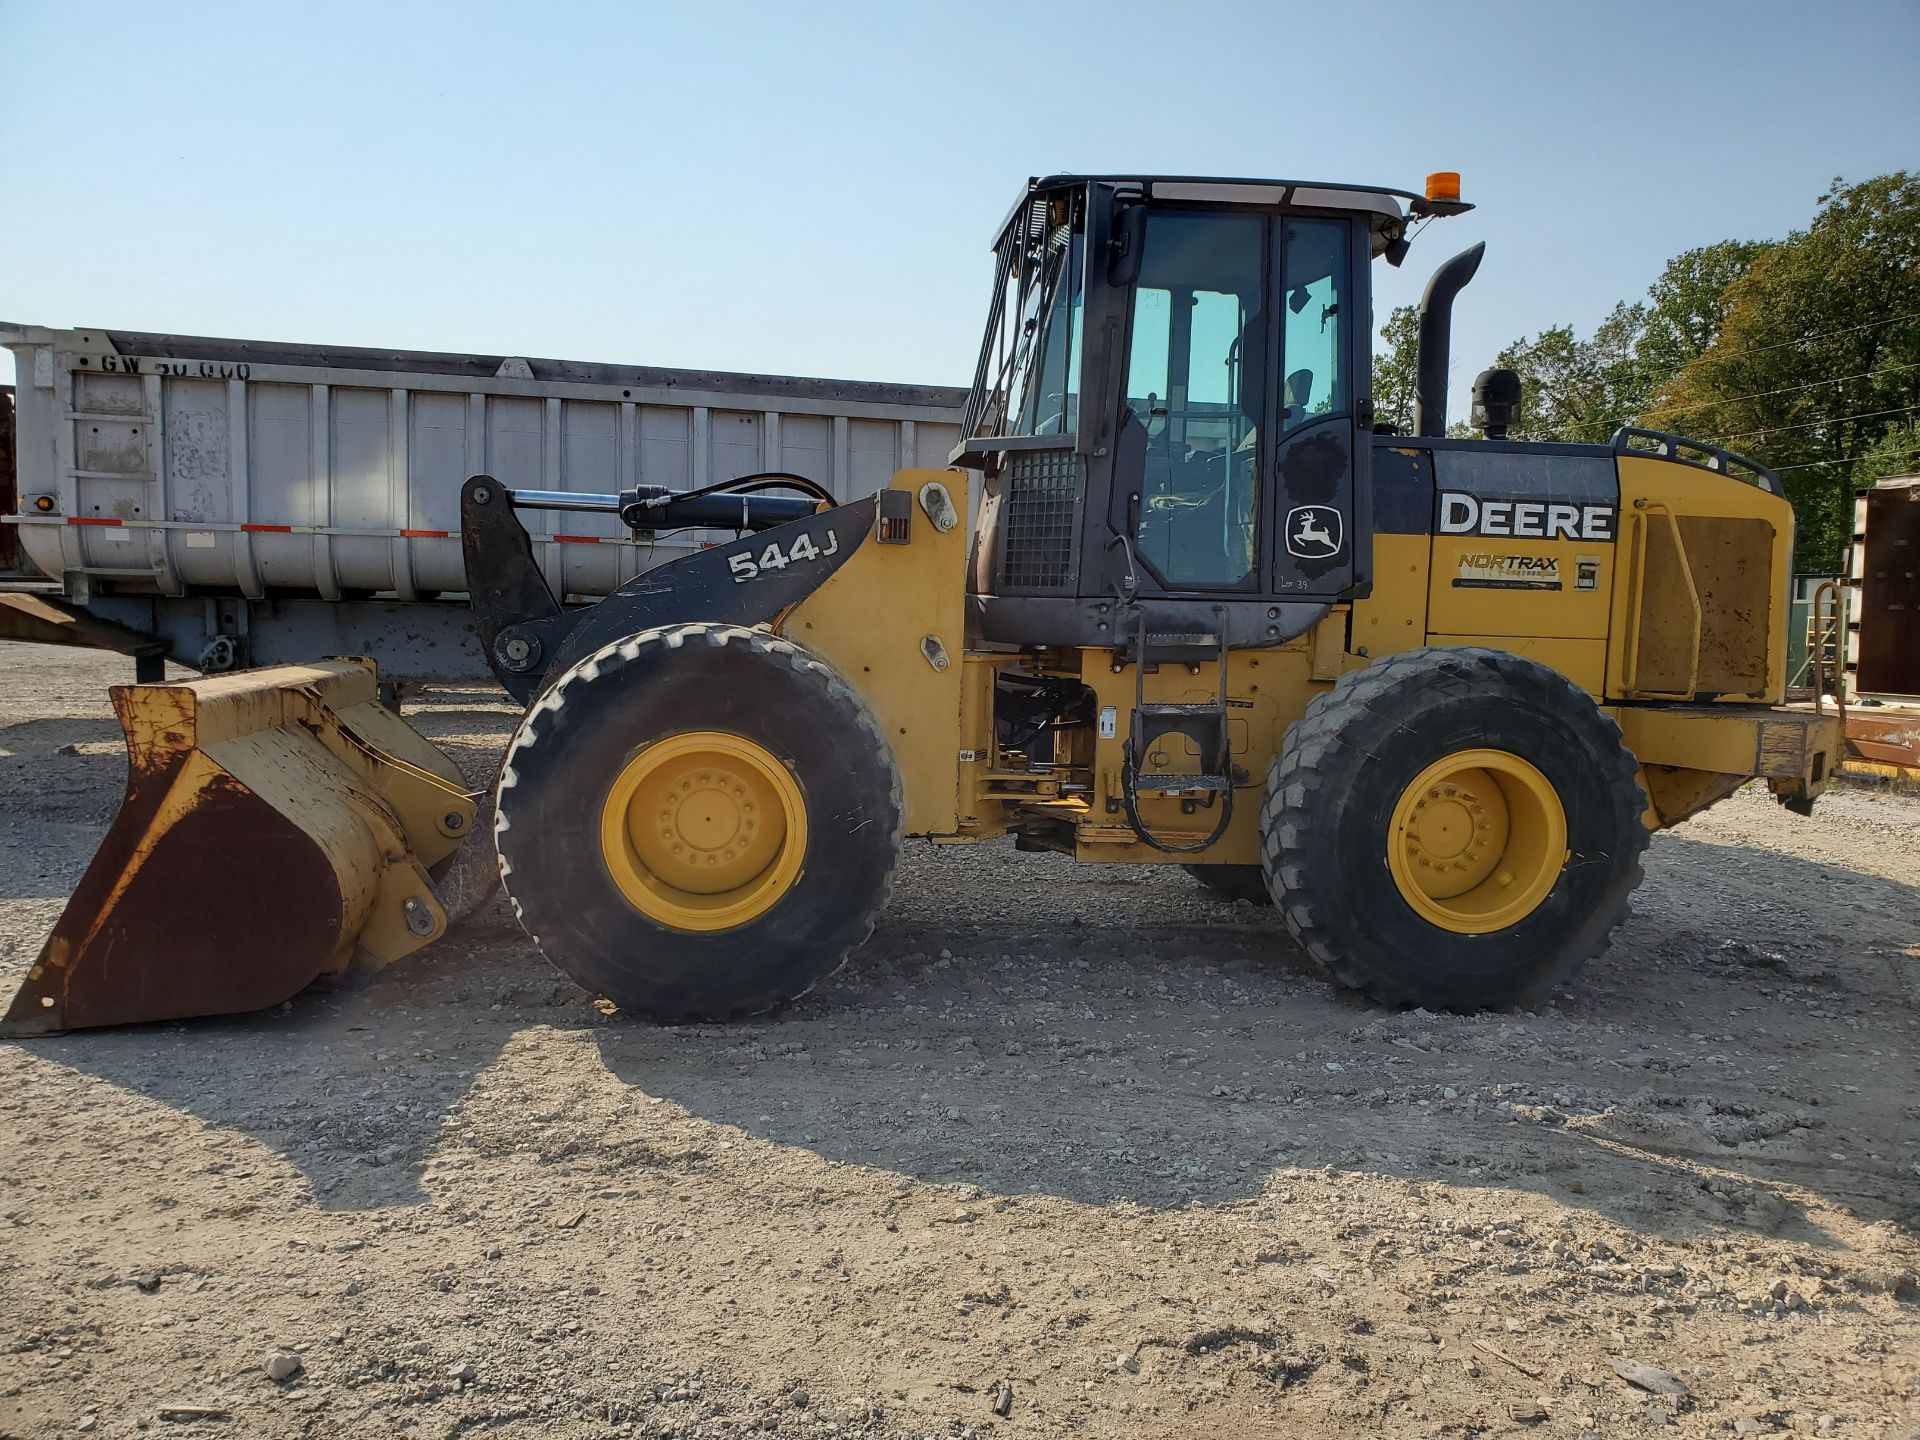 JOHN DEERE 544J ARTICULATING FRONT END LOADER WITH BUCKET, PNEUMATIC TIRES, PIN# DW544JZ604604, - Image 2 of 20